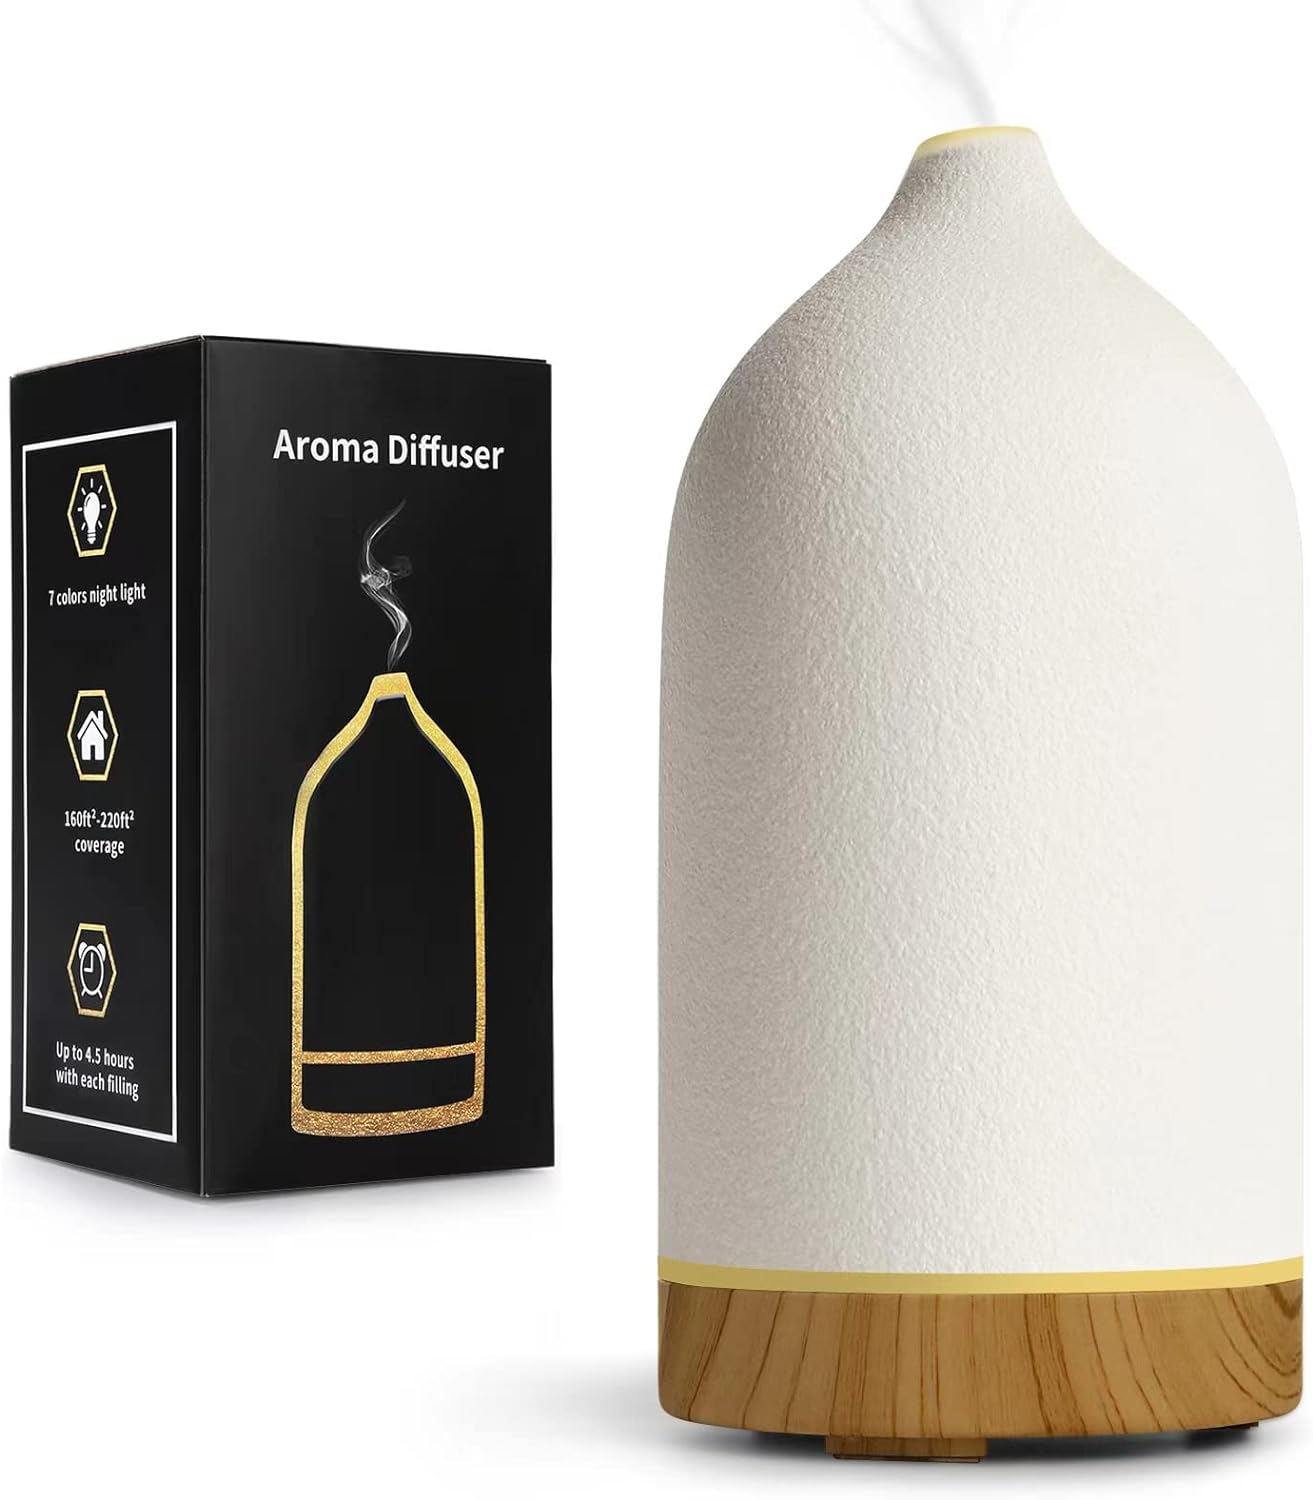 This diffuser is so cute. The cover is like a textured ceramic. This one is smaller and works great if you dont have much space. Runs for about 3 hours and will shut off automatically when it runs out of water. Changes colors and can set different run times.